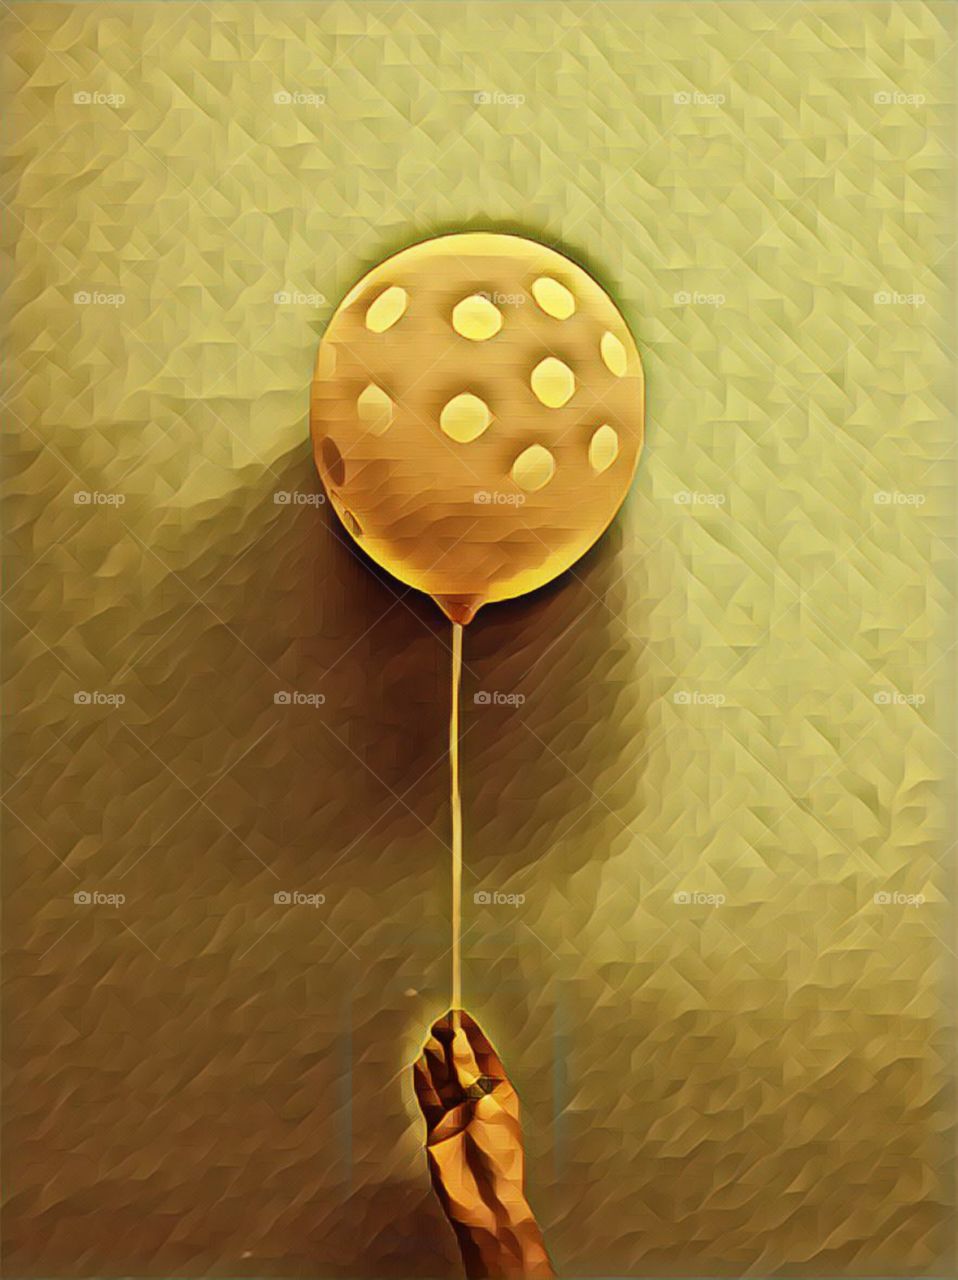 Picture of a balloon